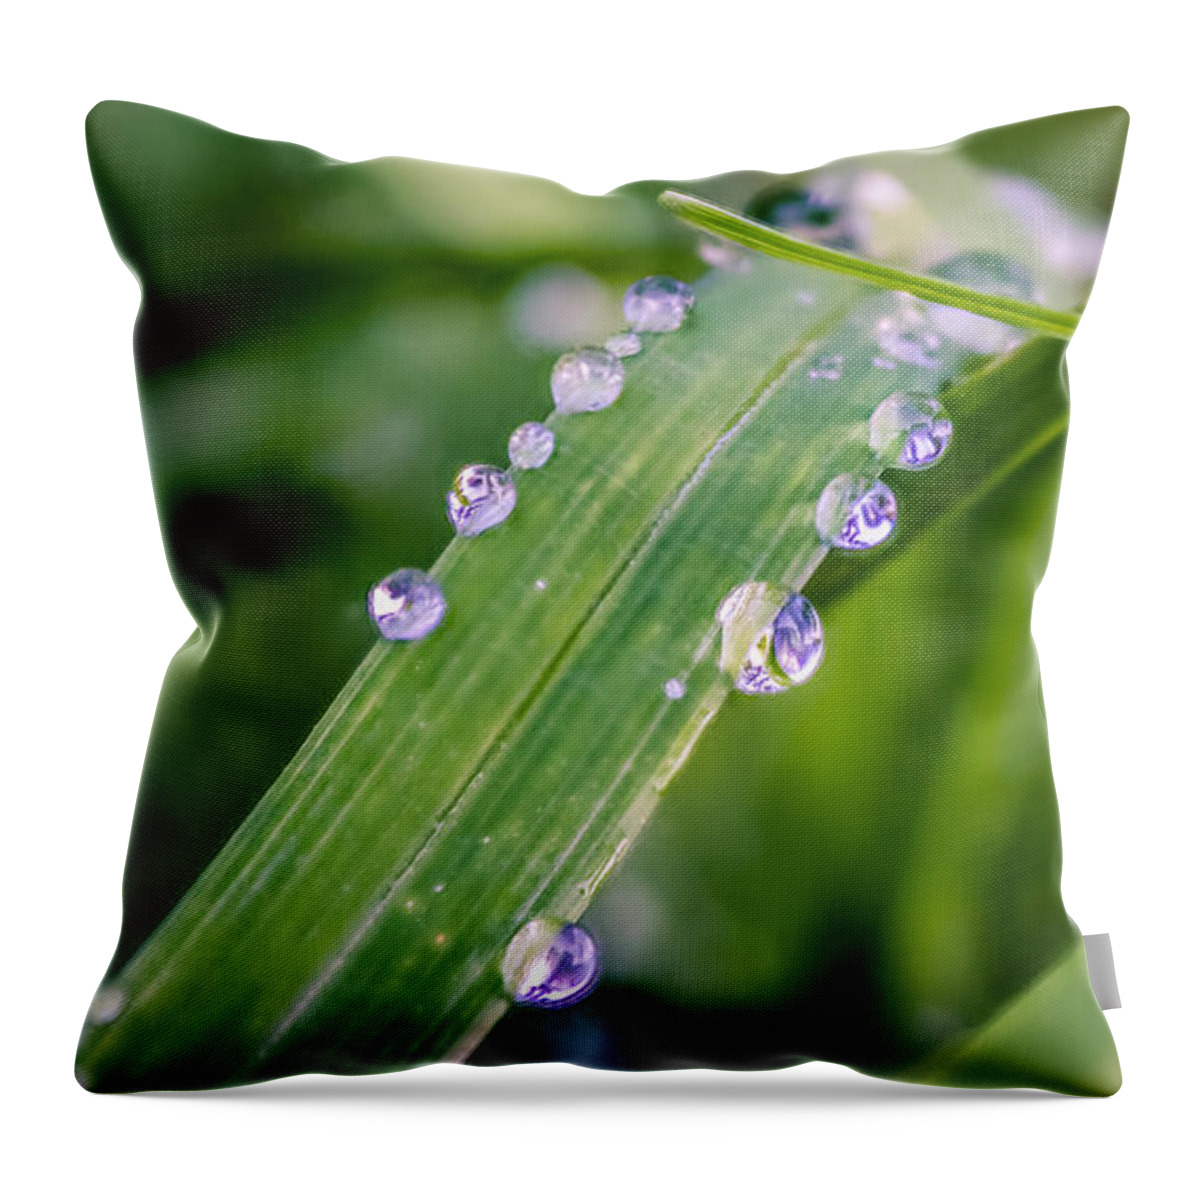 Rain Throw Pillow featuring the photograph Drops On Grass by Rob Sellers